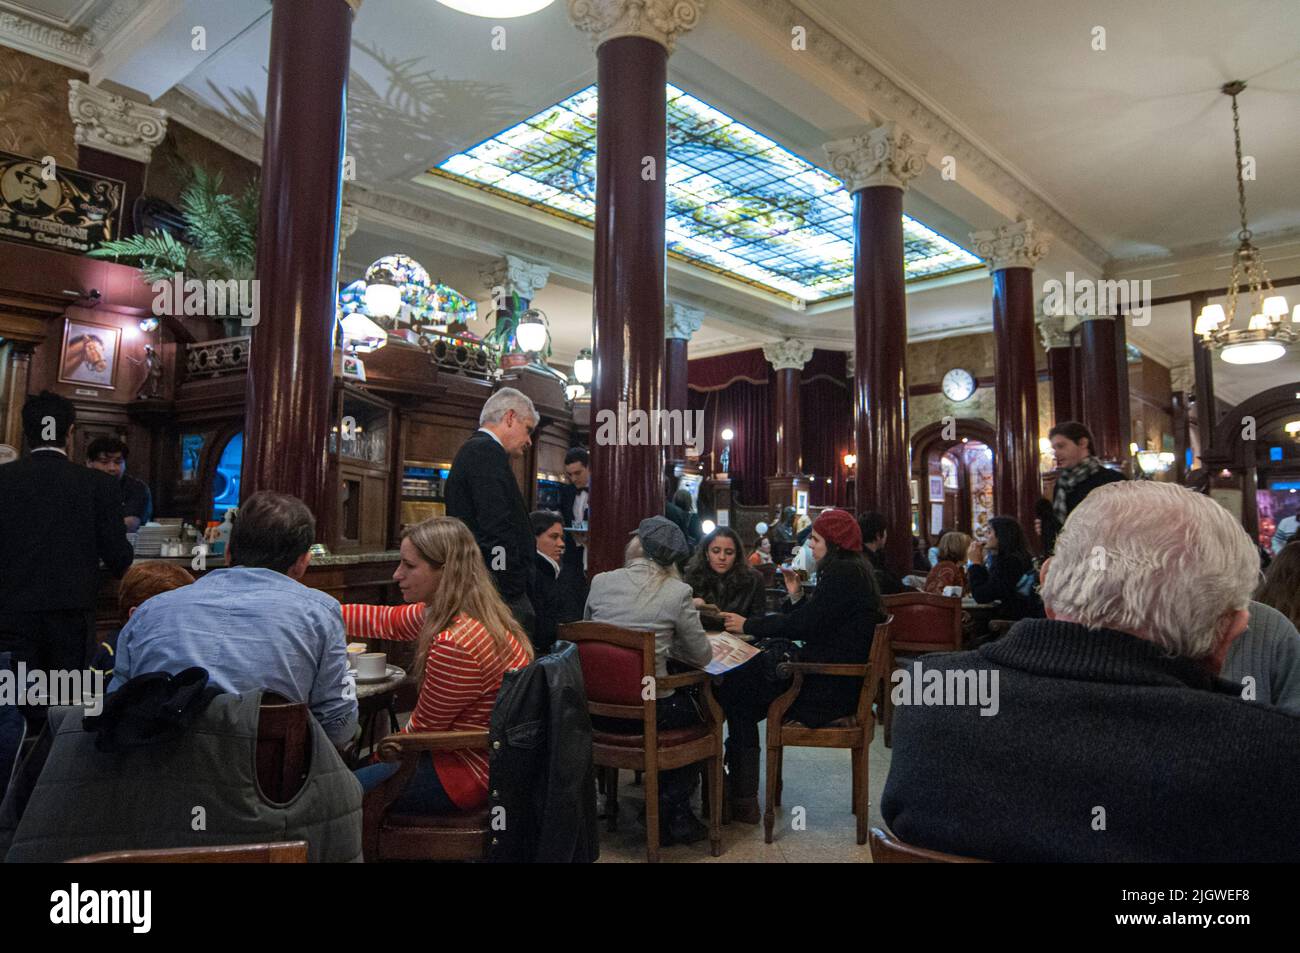 The crowded interior of the Cafe Tortoni in Buenos Aires, Argentina Stock Photo